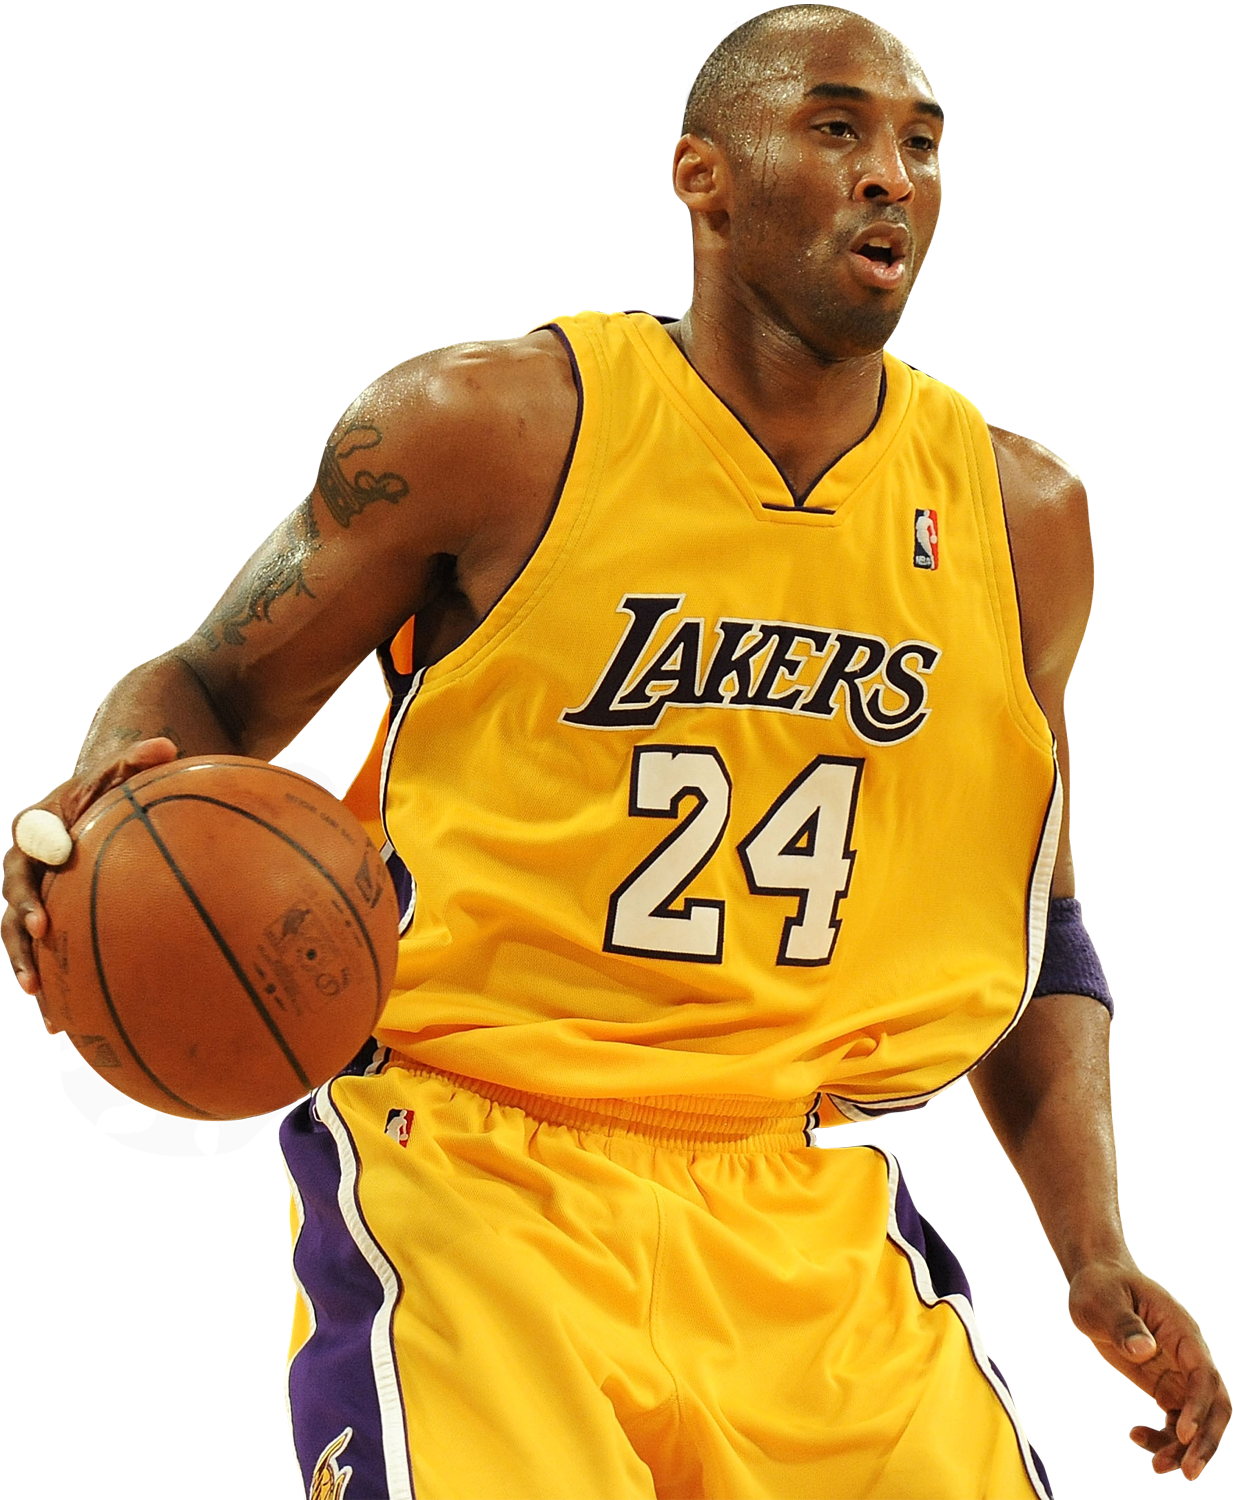 A Basketball Player In A Yellow Jersey Holding A Basketball